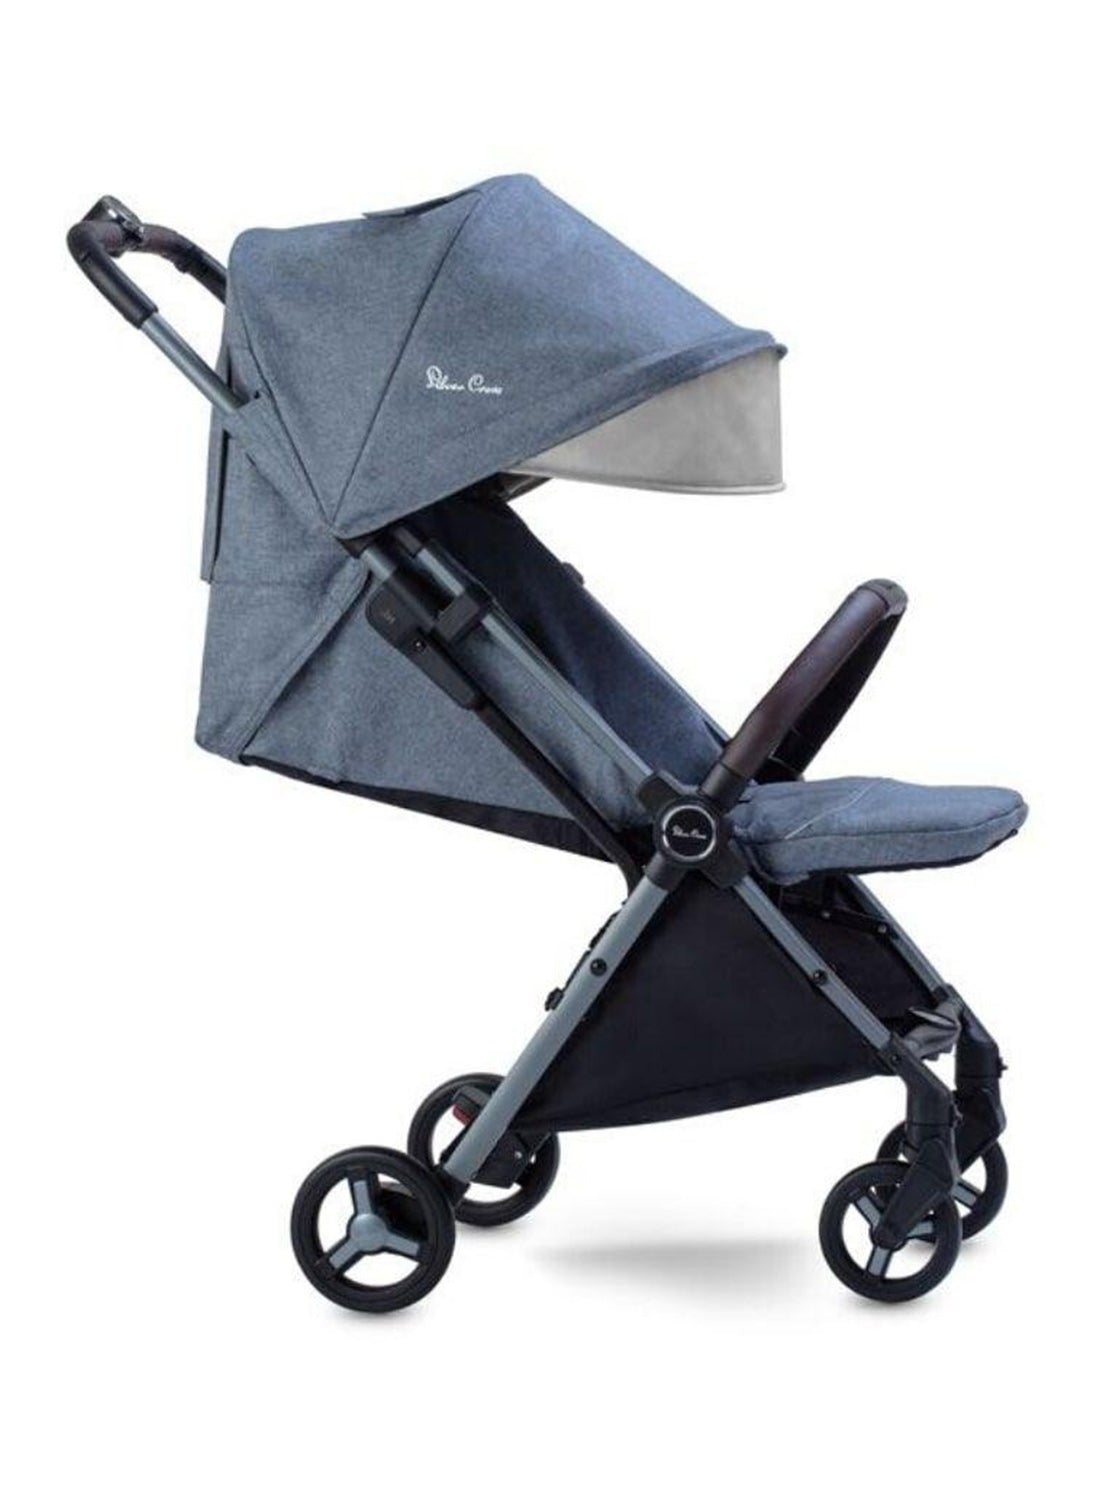 SILVER CROSS Jet Super Compact Stroller Special Edition - ANB Baby -$300 - $500